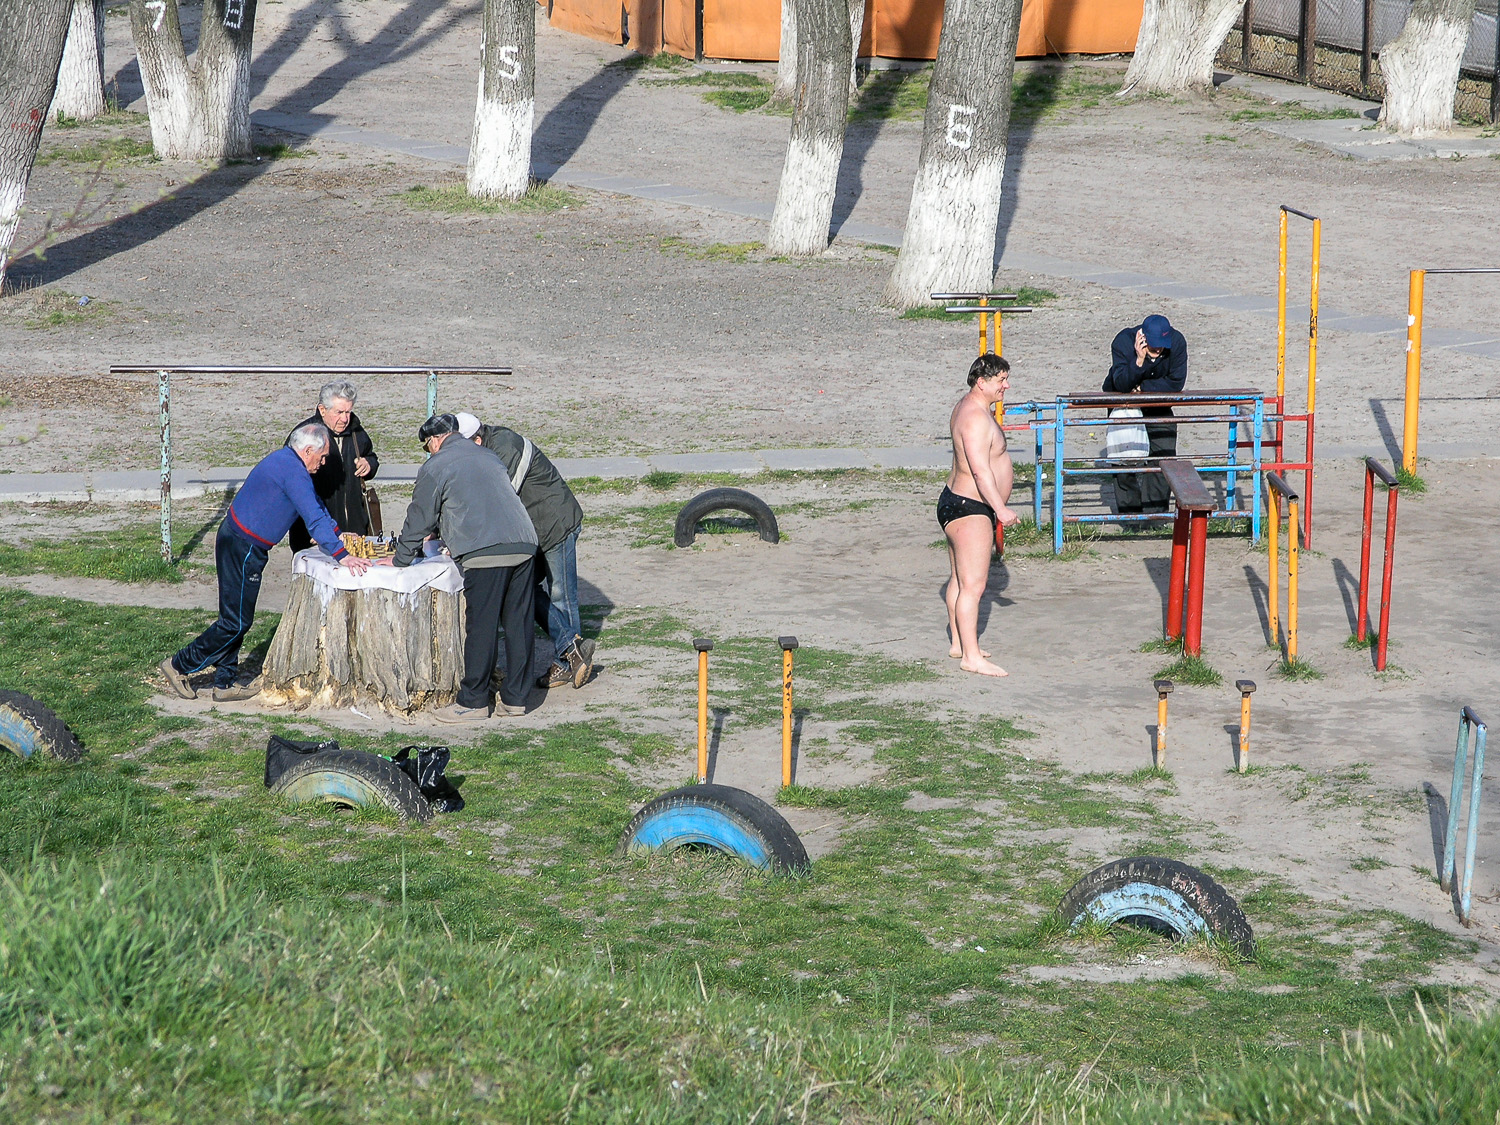  Men playing chess in a playground on ‘Hidropark’, an island in the middle of the Dnieper river in Kyiv. The island is a popular place for recreation in the summer months. 